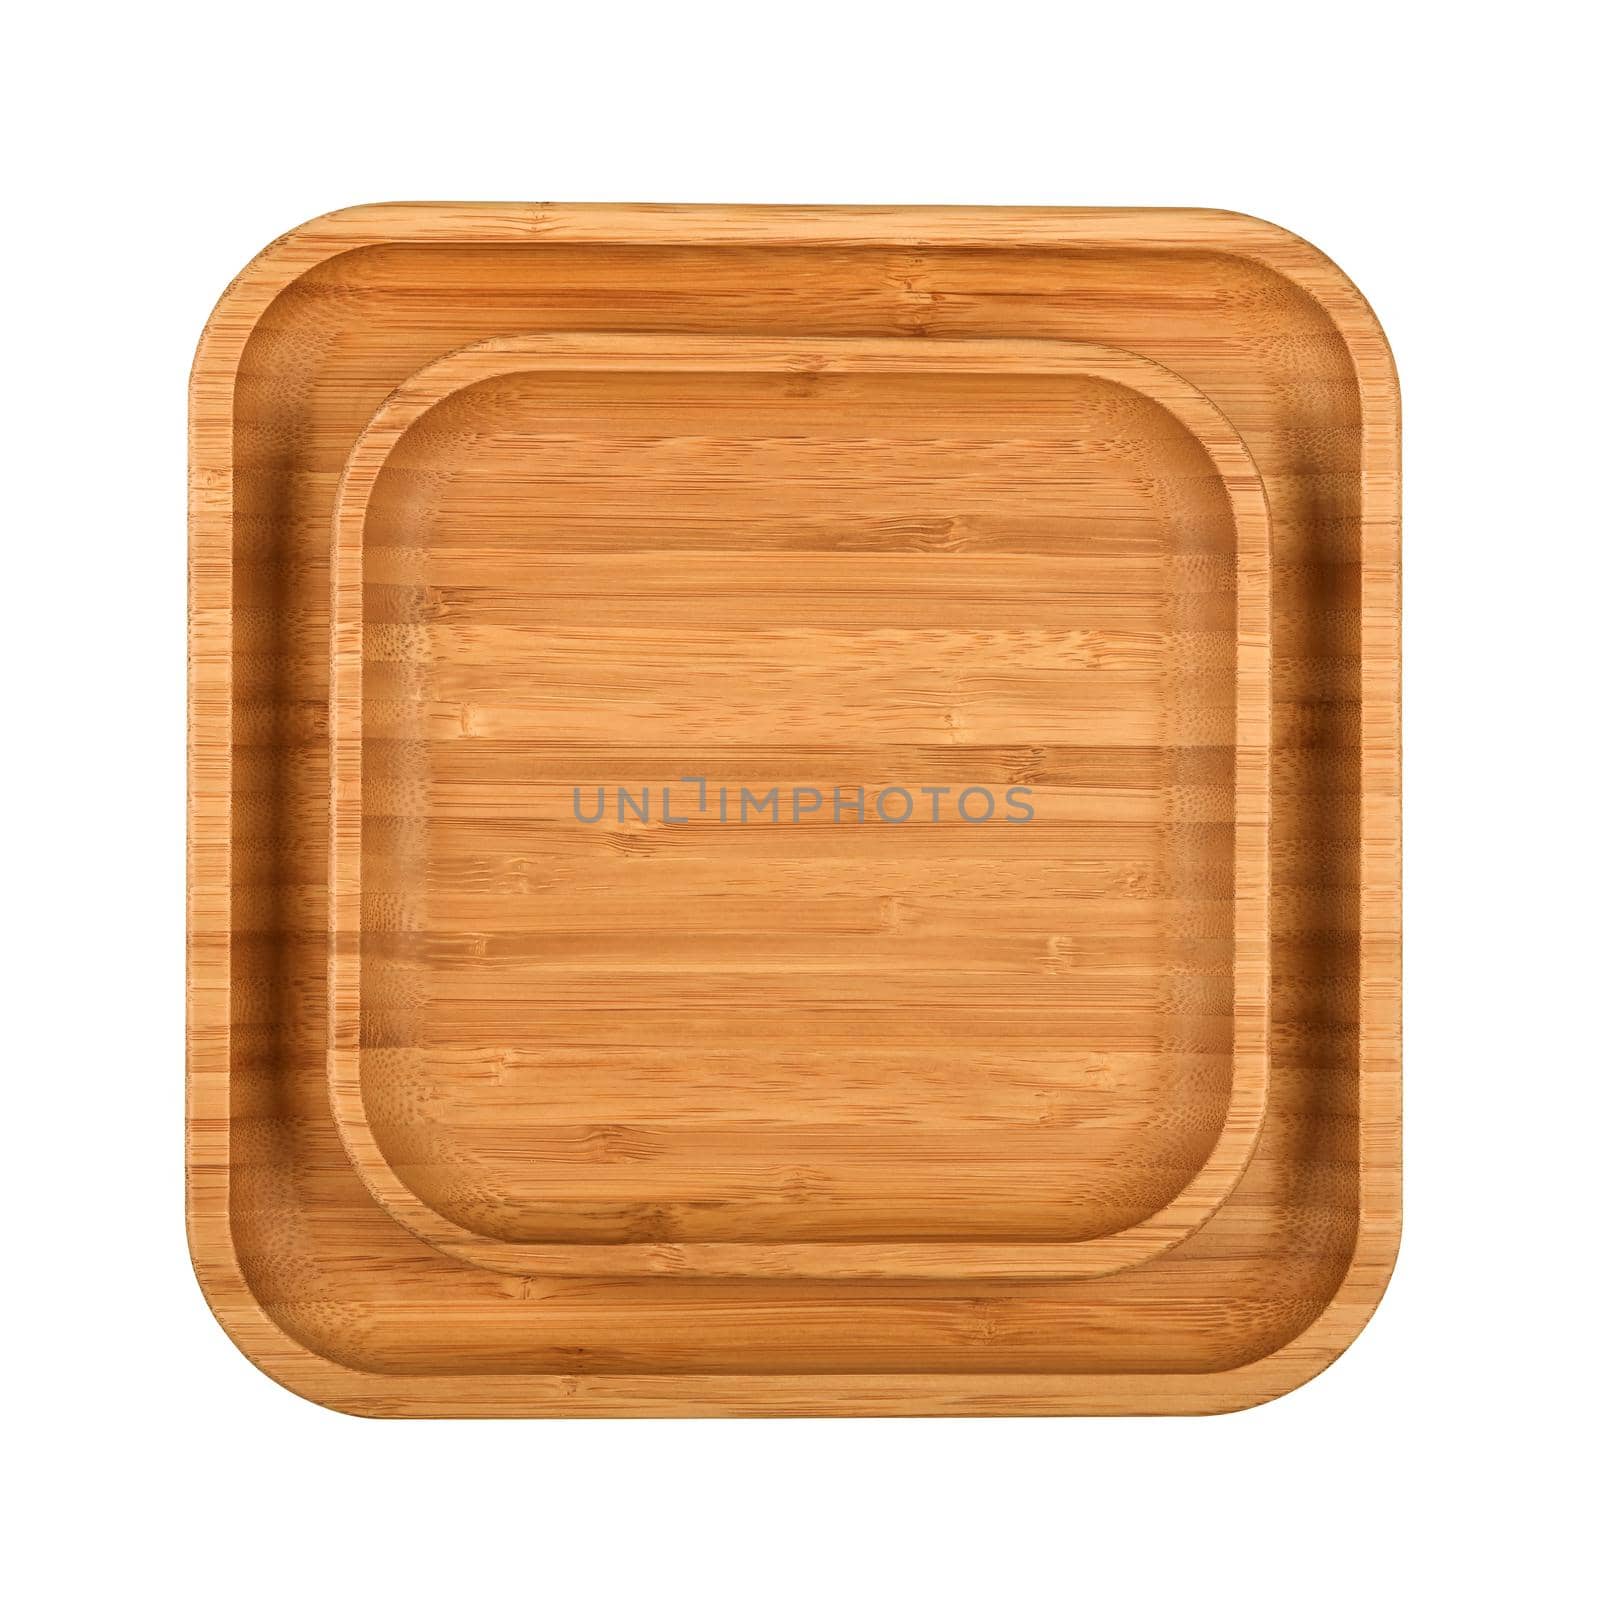 Close up set of two empty brown bamboo wooden plates or food trays isolated on white background, elevated top view, directly above